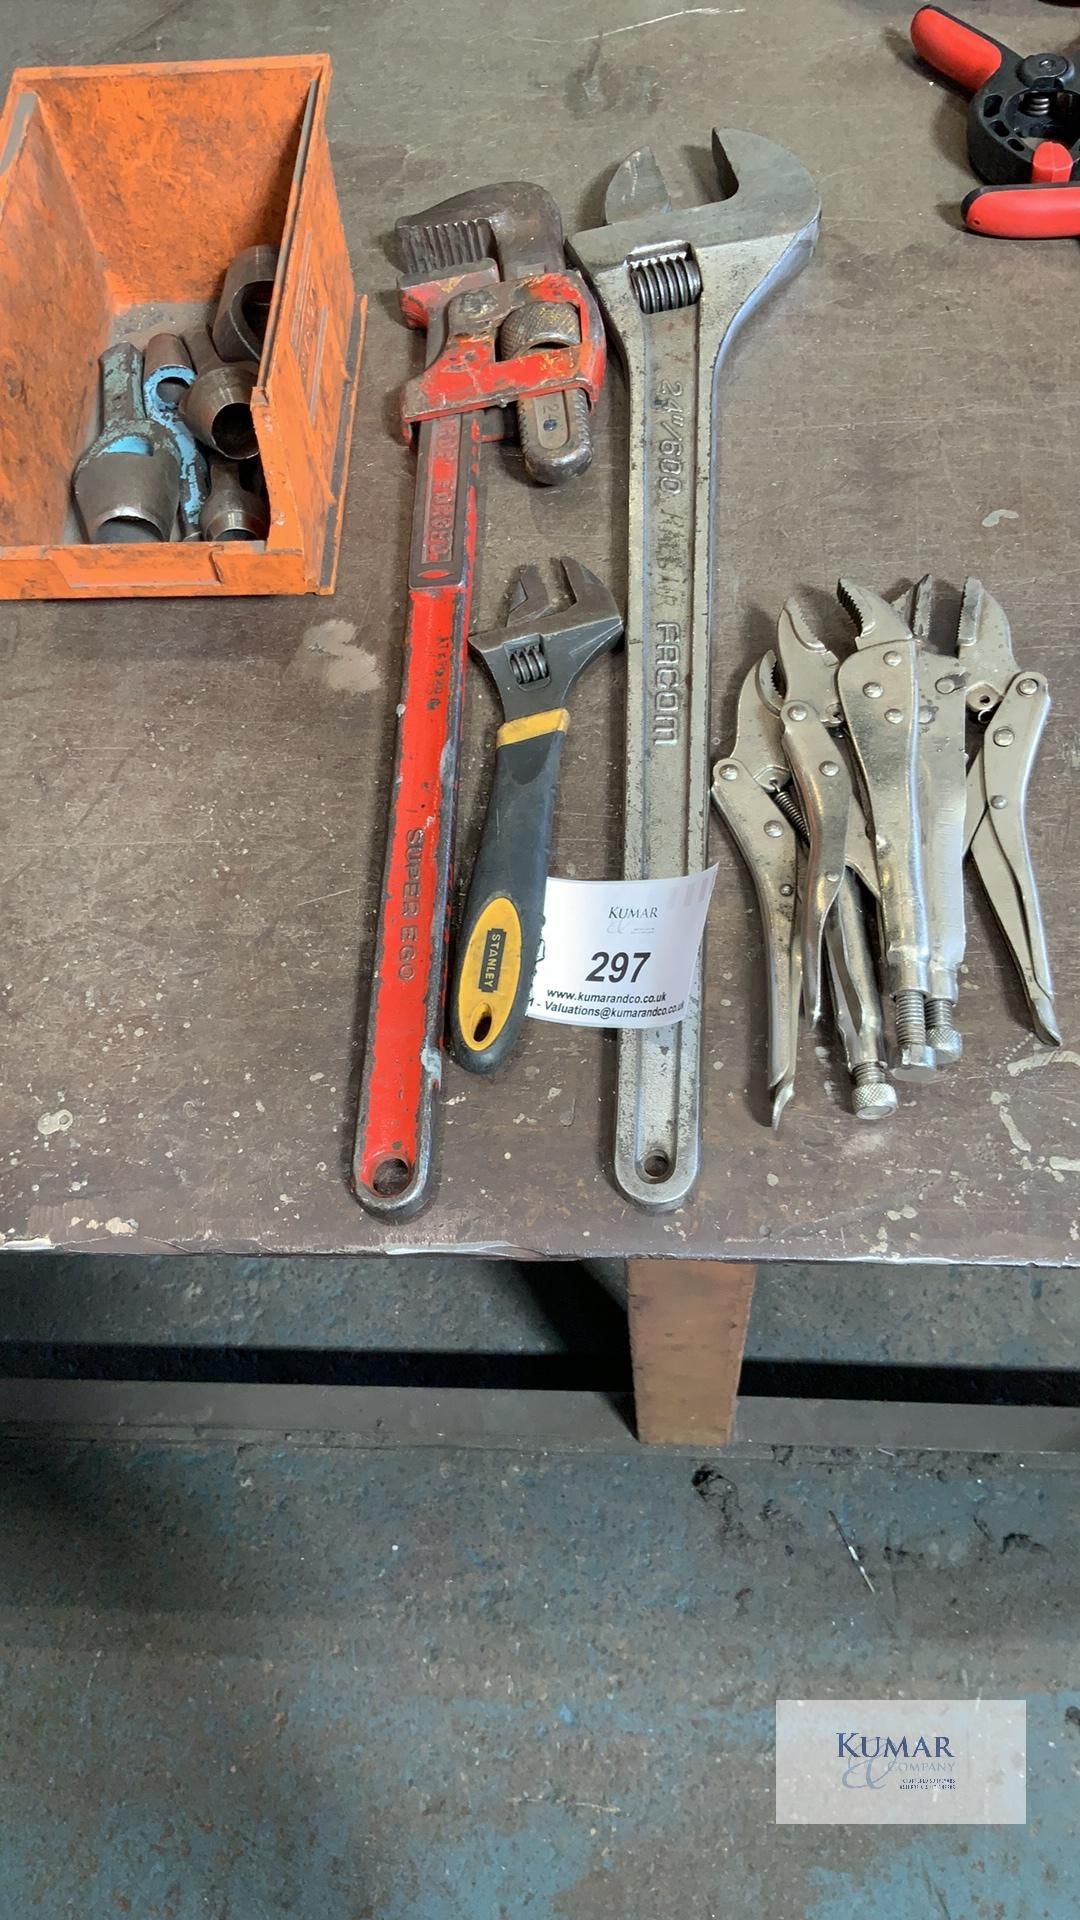 Quantity of Wrenches & Adjustable Spanner As Shown